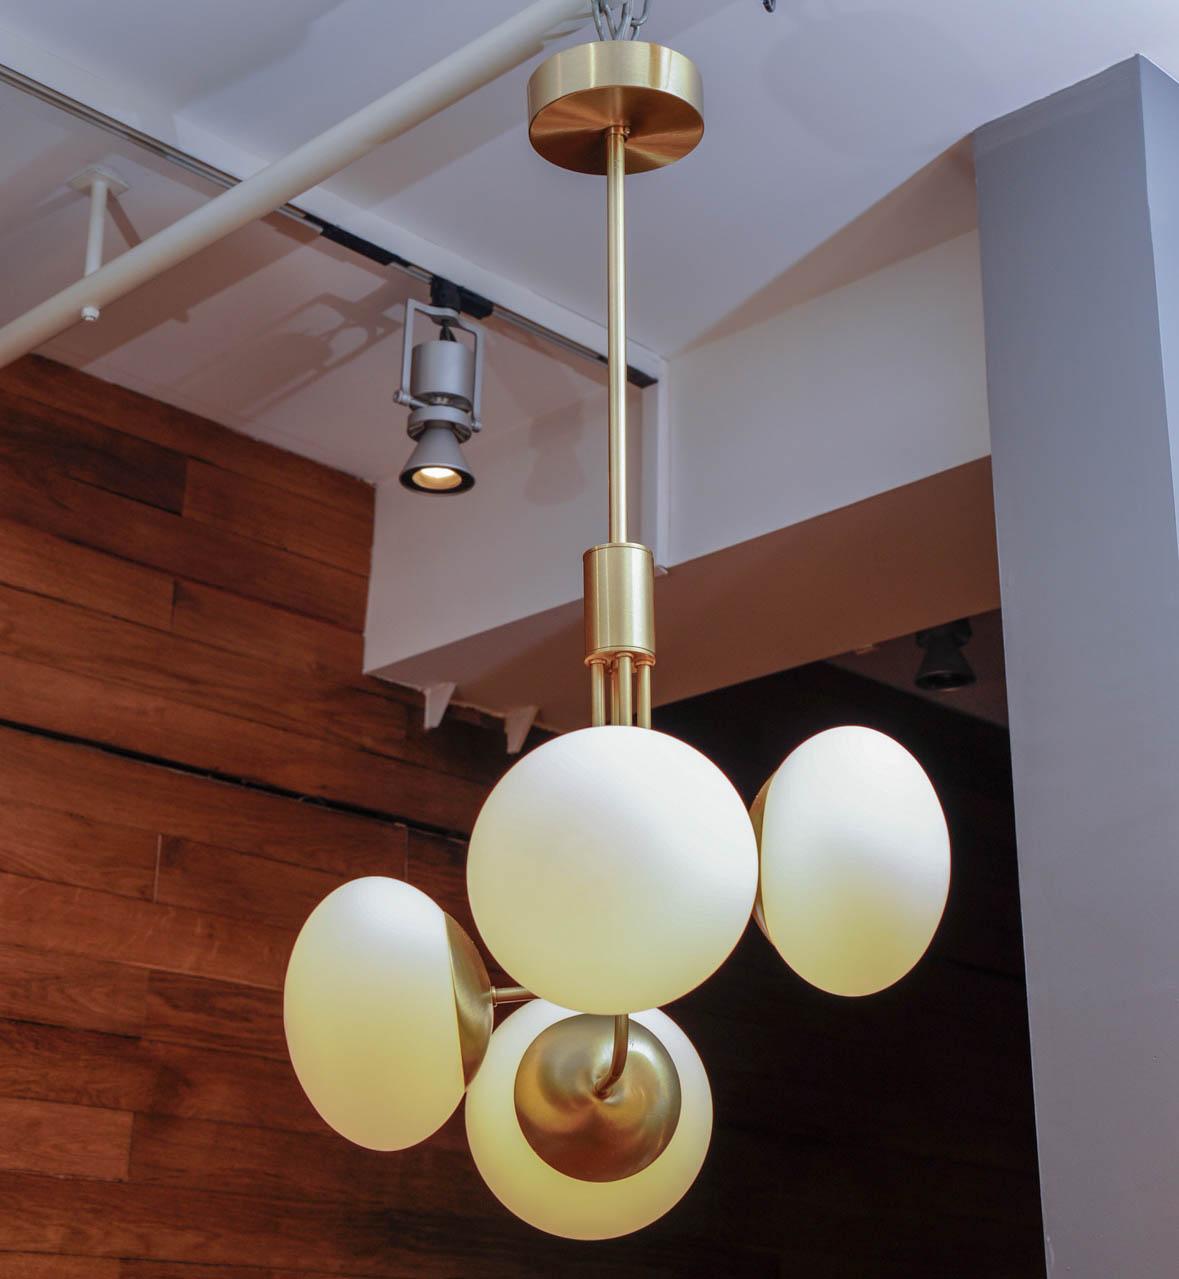 Nice and elegant suspension made of satin brass, four arms of light with white glass globes.
 